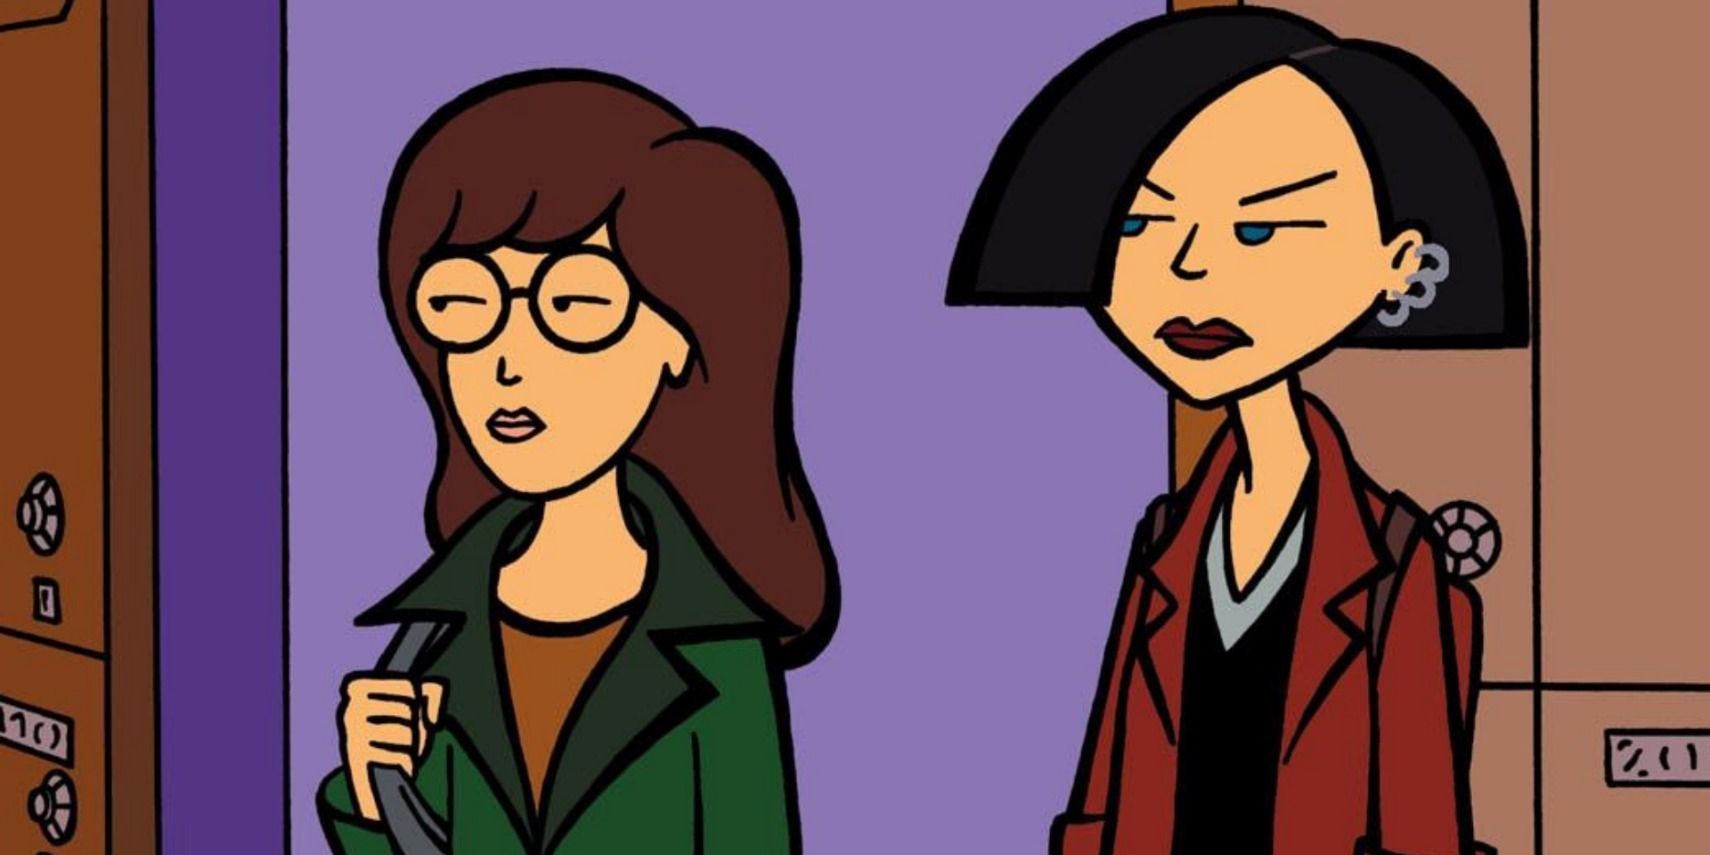 Daria and her friend standing by a door in a scene from the '90s cartoon.